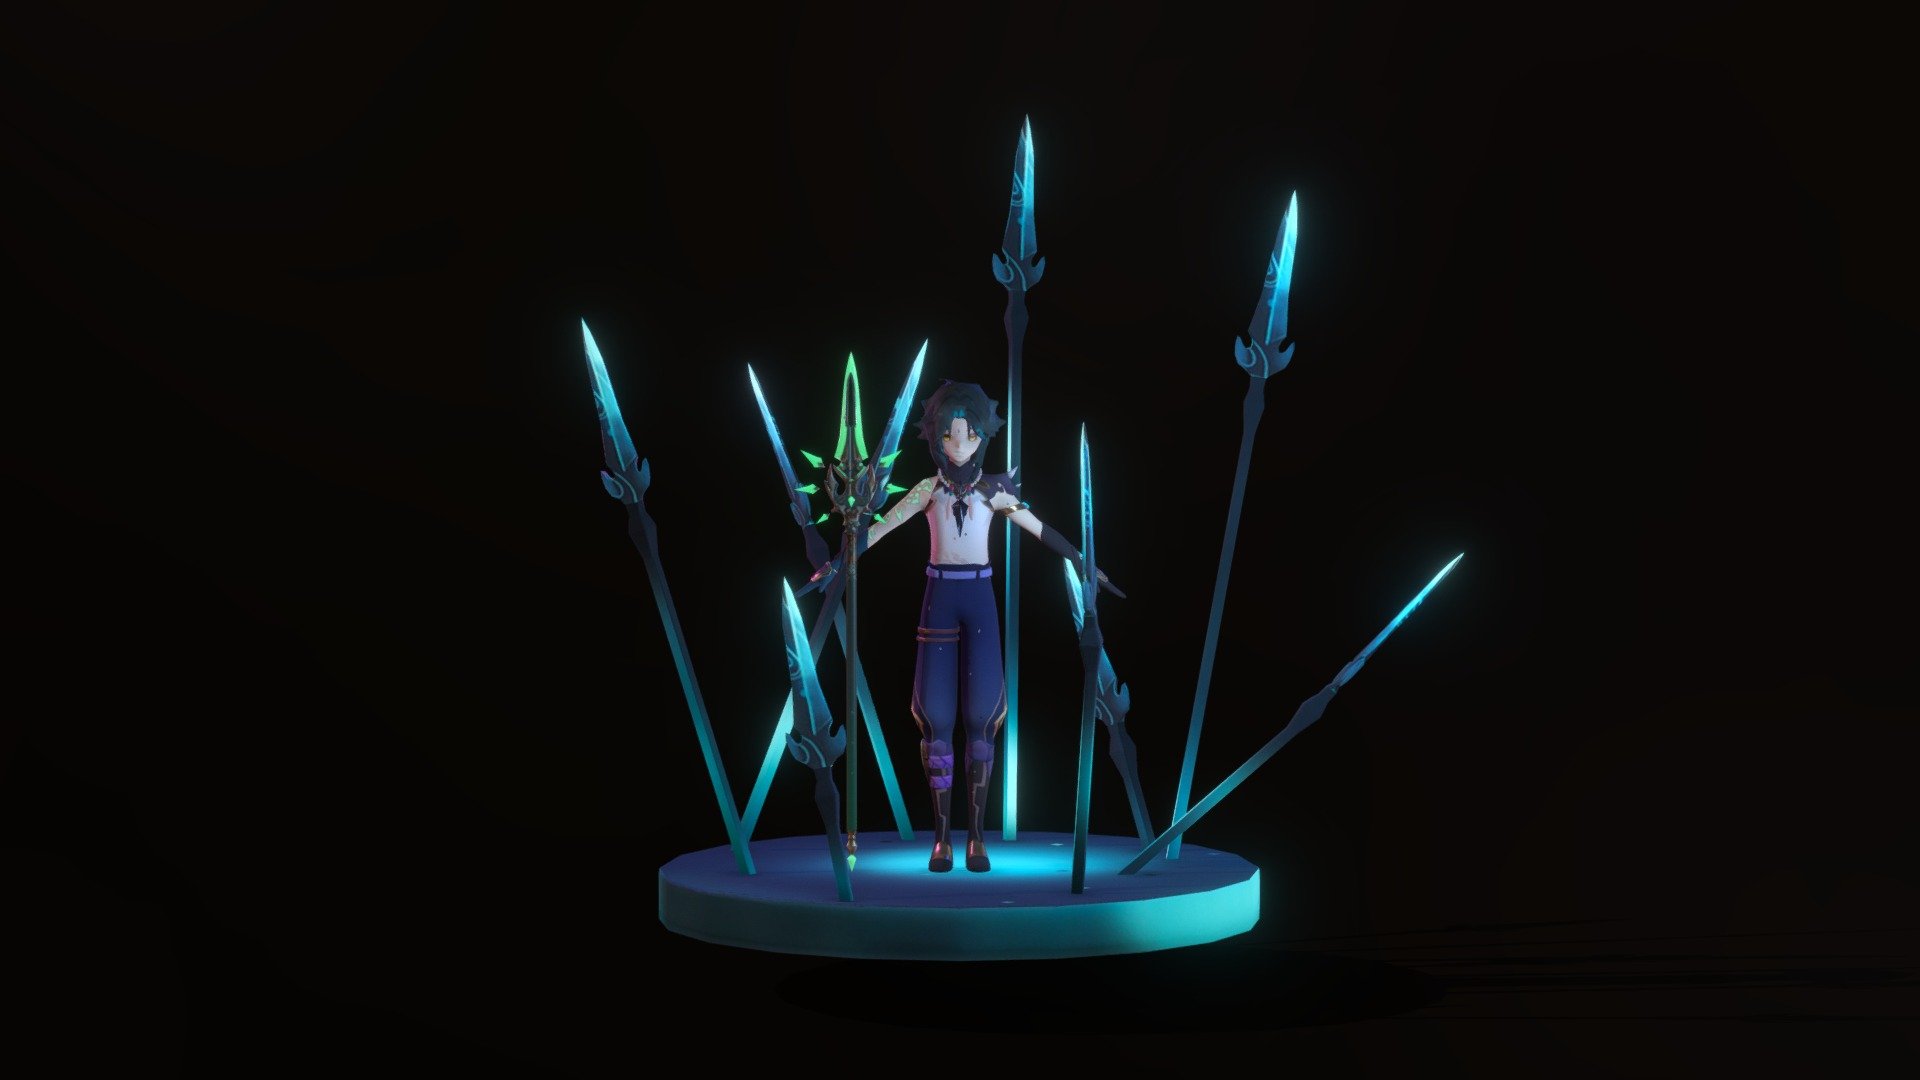 Project developed with @bmaia for a school assignment.

Character, prop and base modelled after the Xiao character and weapon from Genshin Impact 3d model